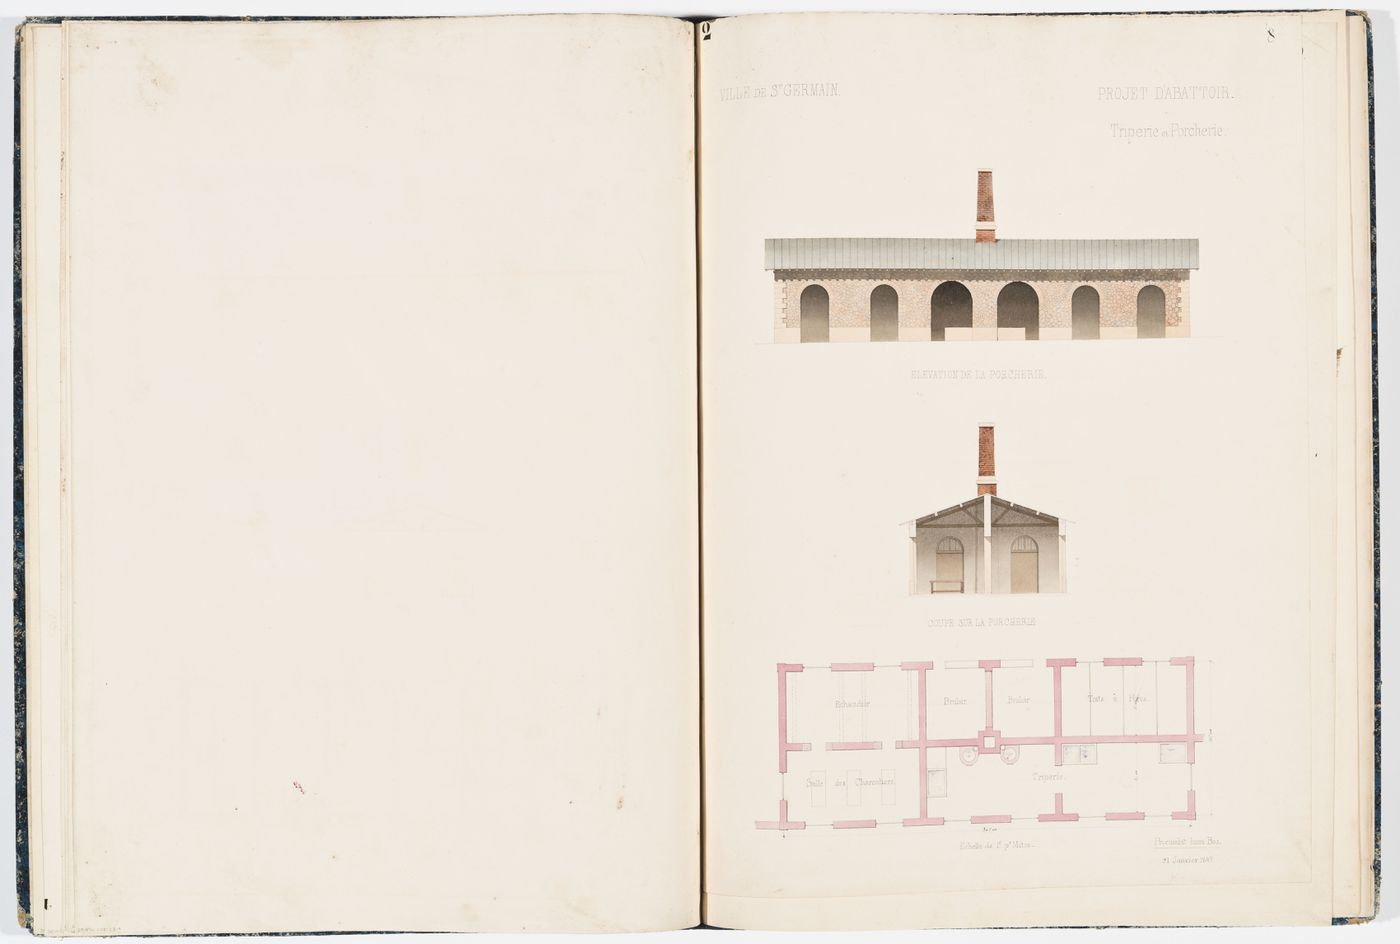 Plan and elevation for the "porcherie" including the "triperie"